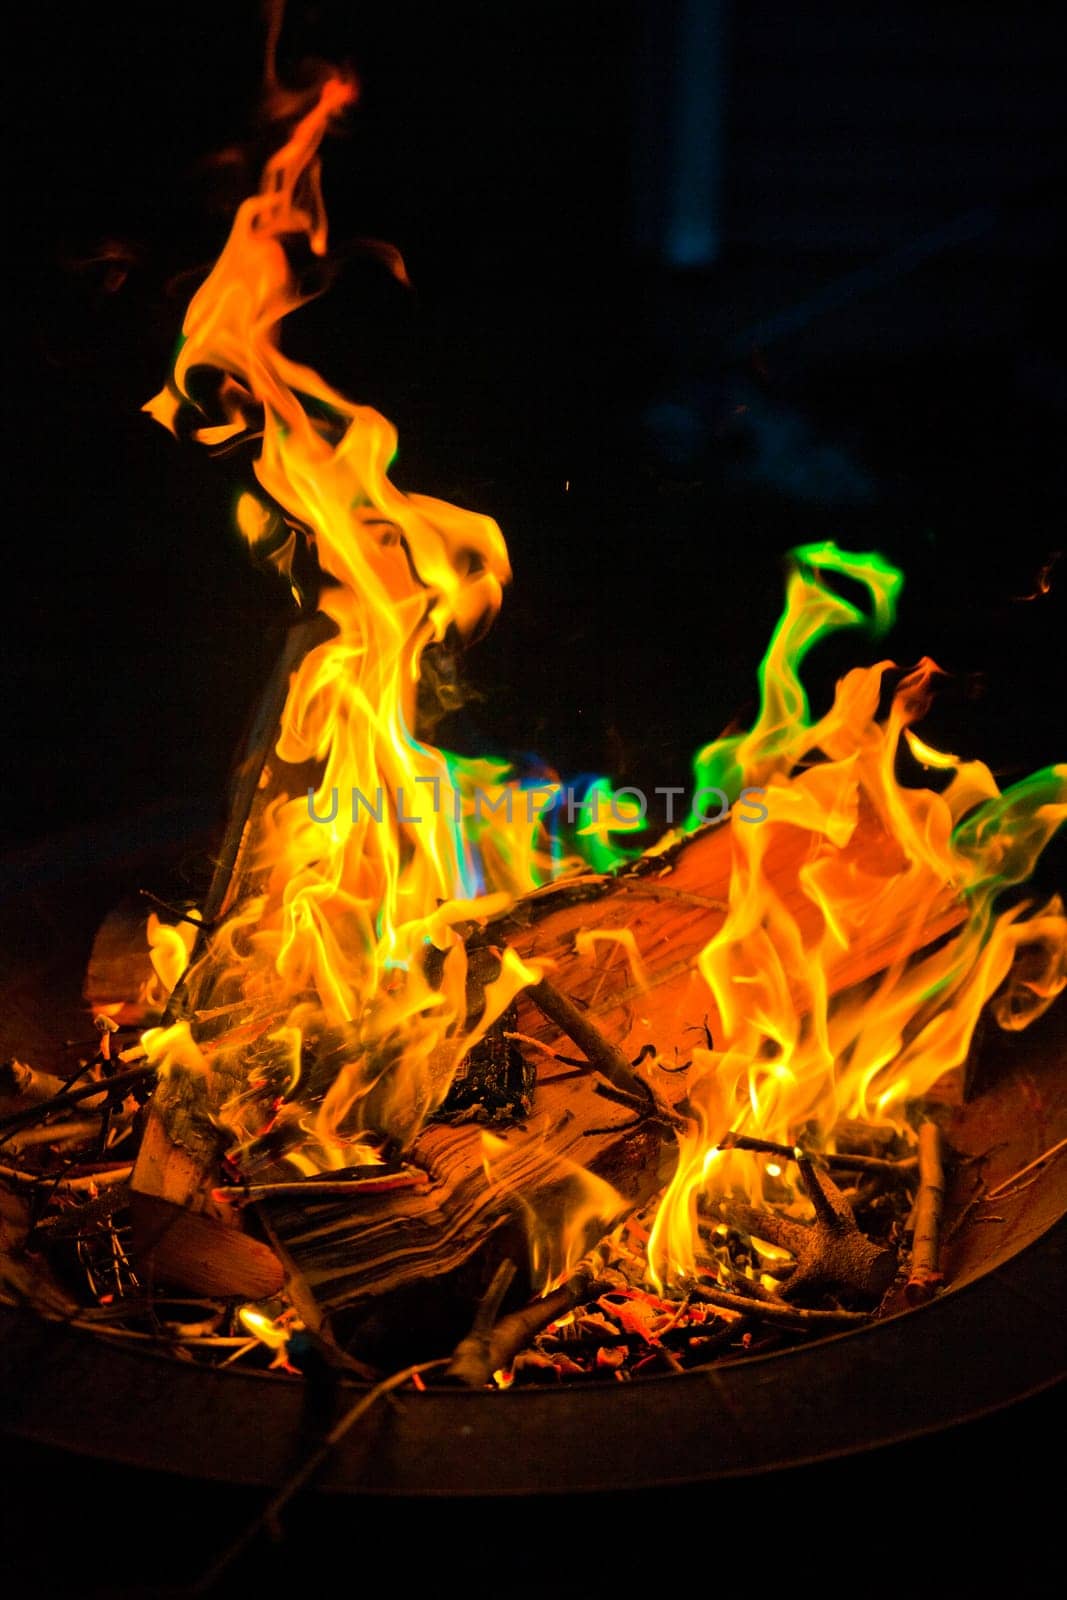 Dynamic and Vibrant Wood Fire with Dancing Flames, Fort Wayne, Indiana